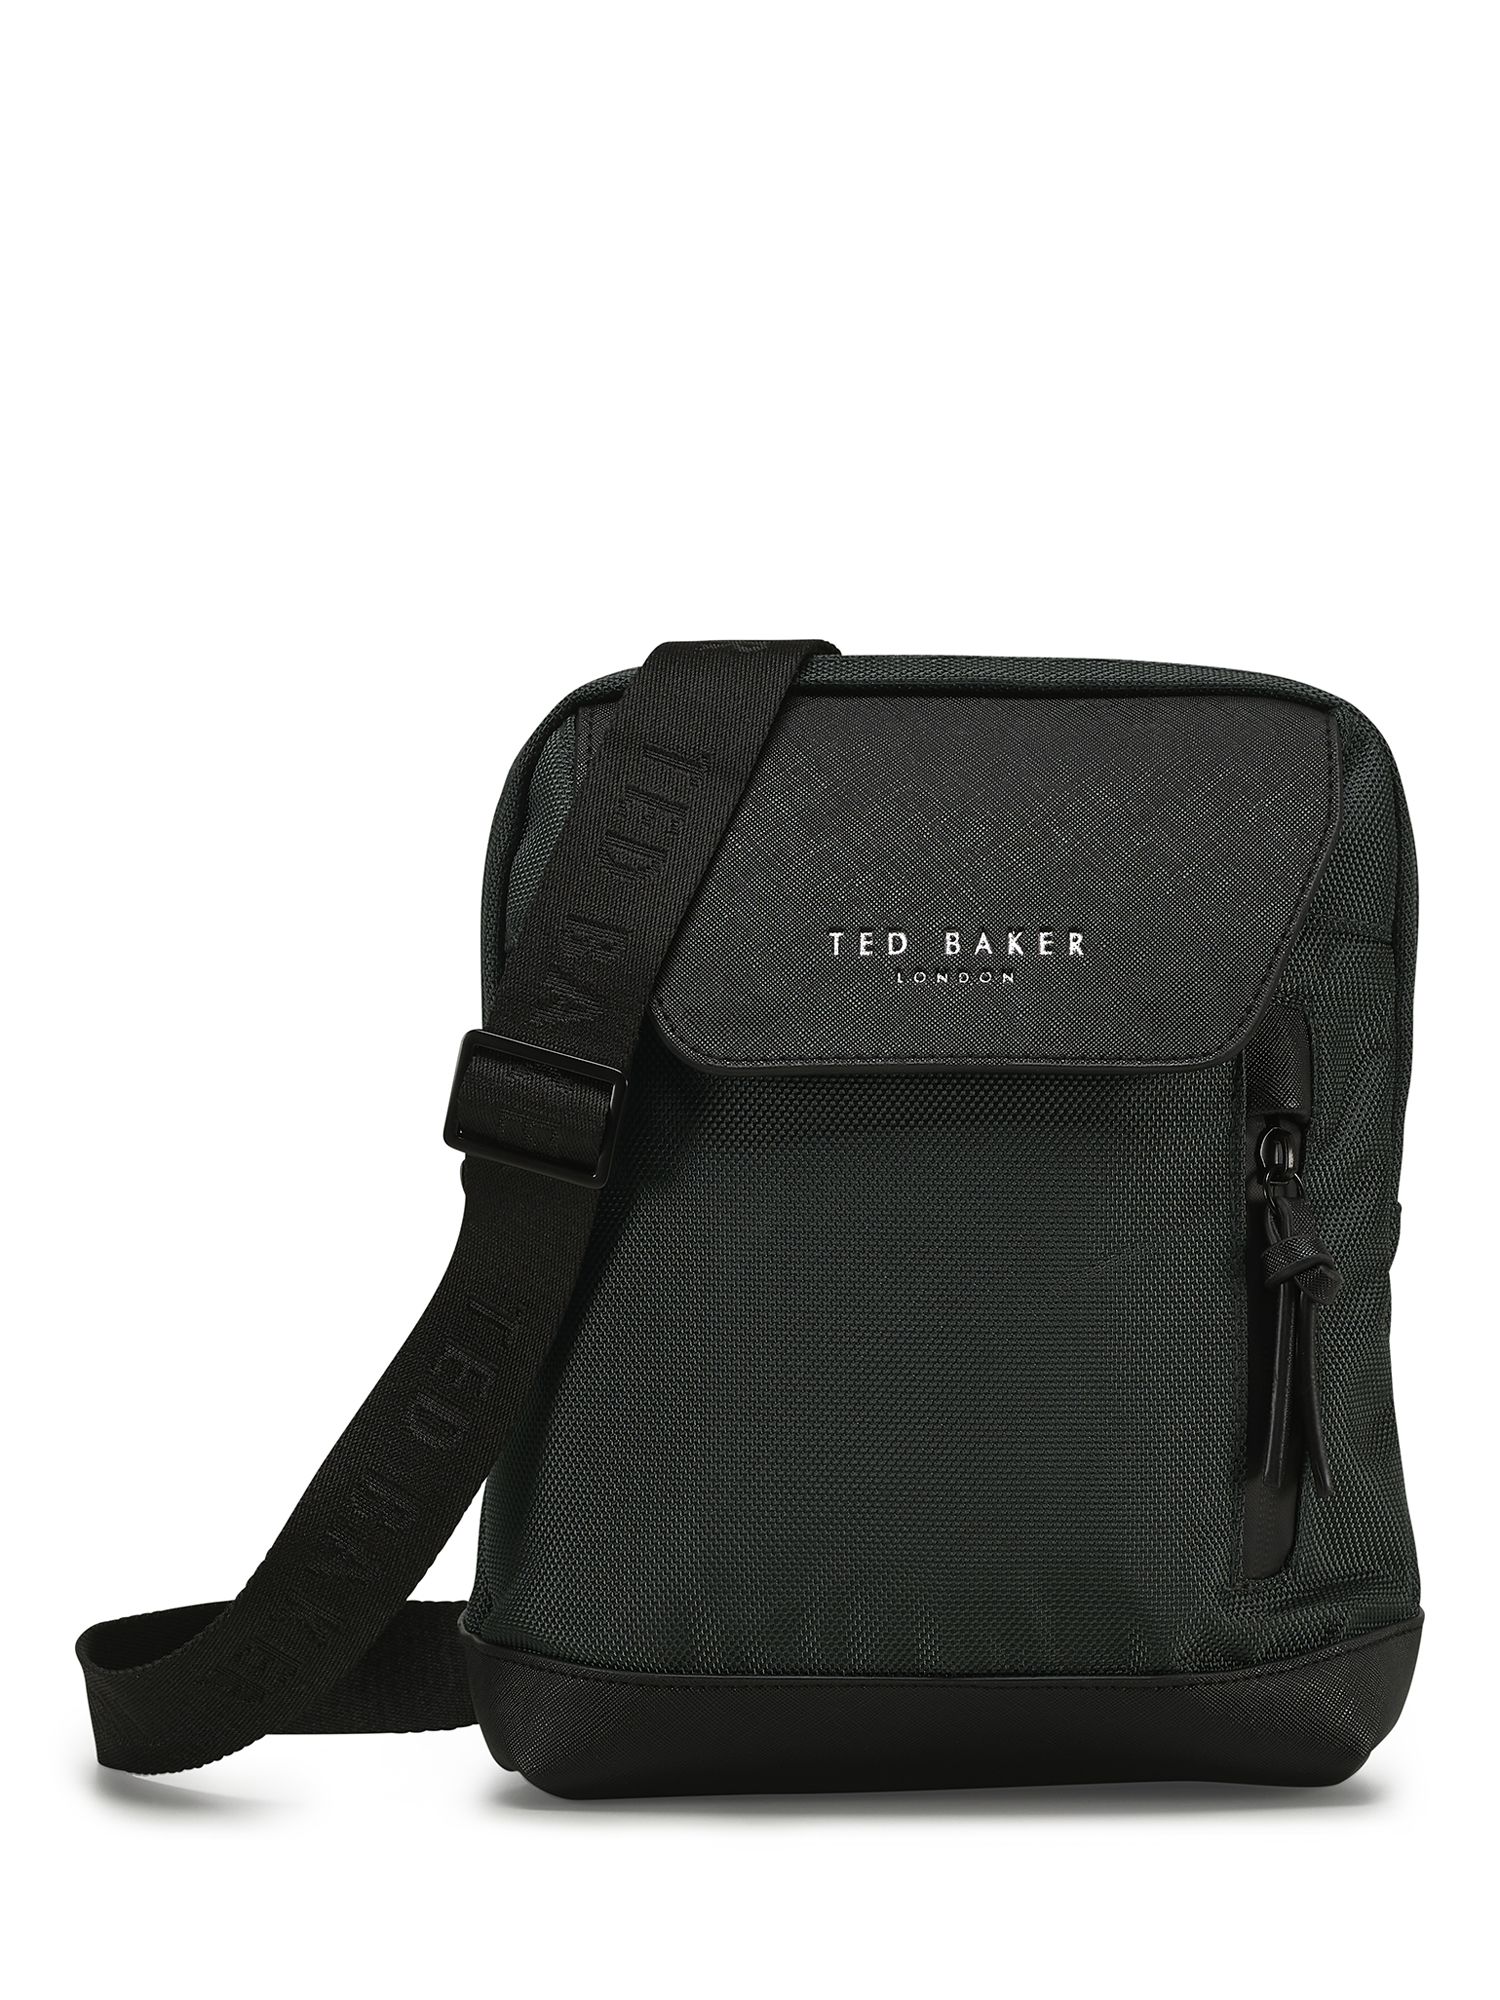 Ted Baker Nomad Cross Body Bag, Pewter Grey at John Lewis & Partners